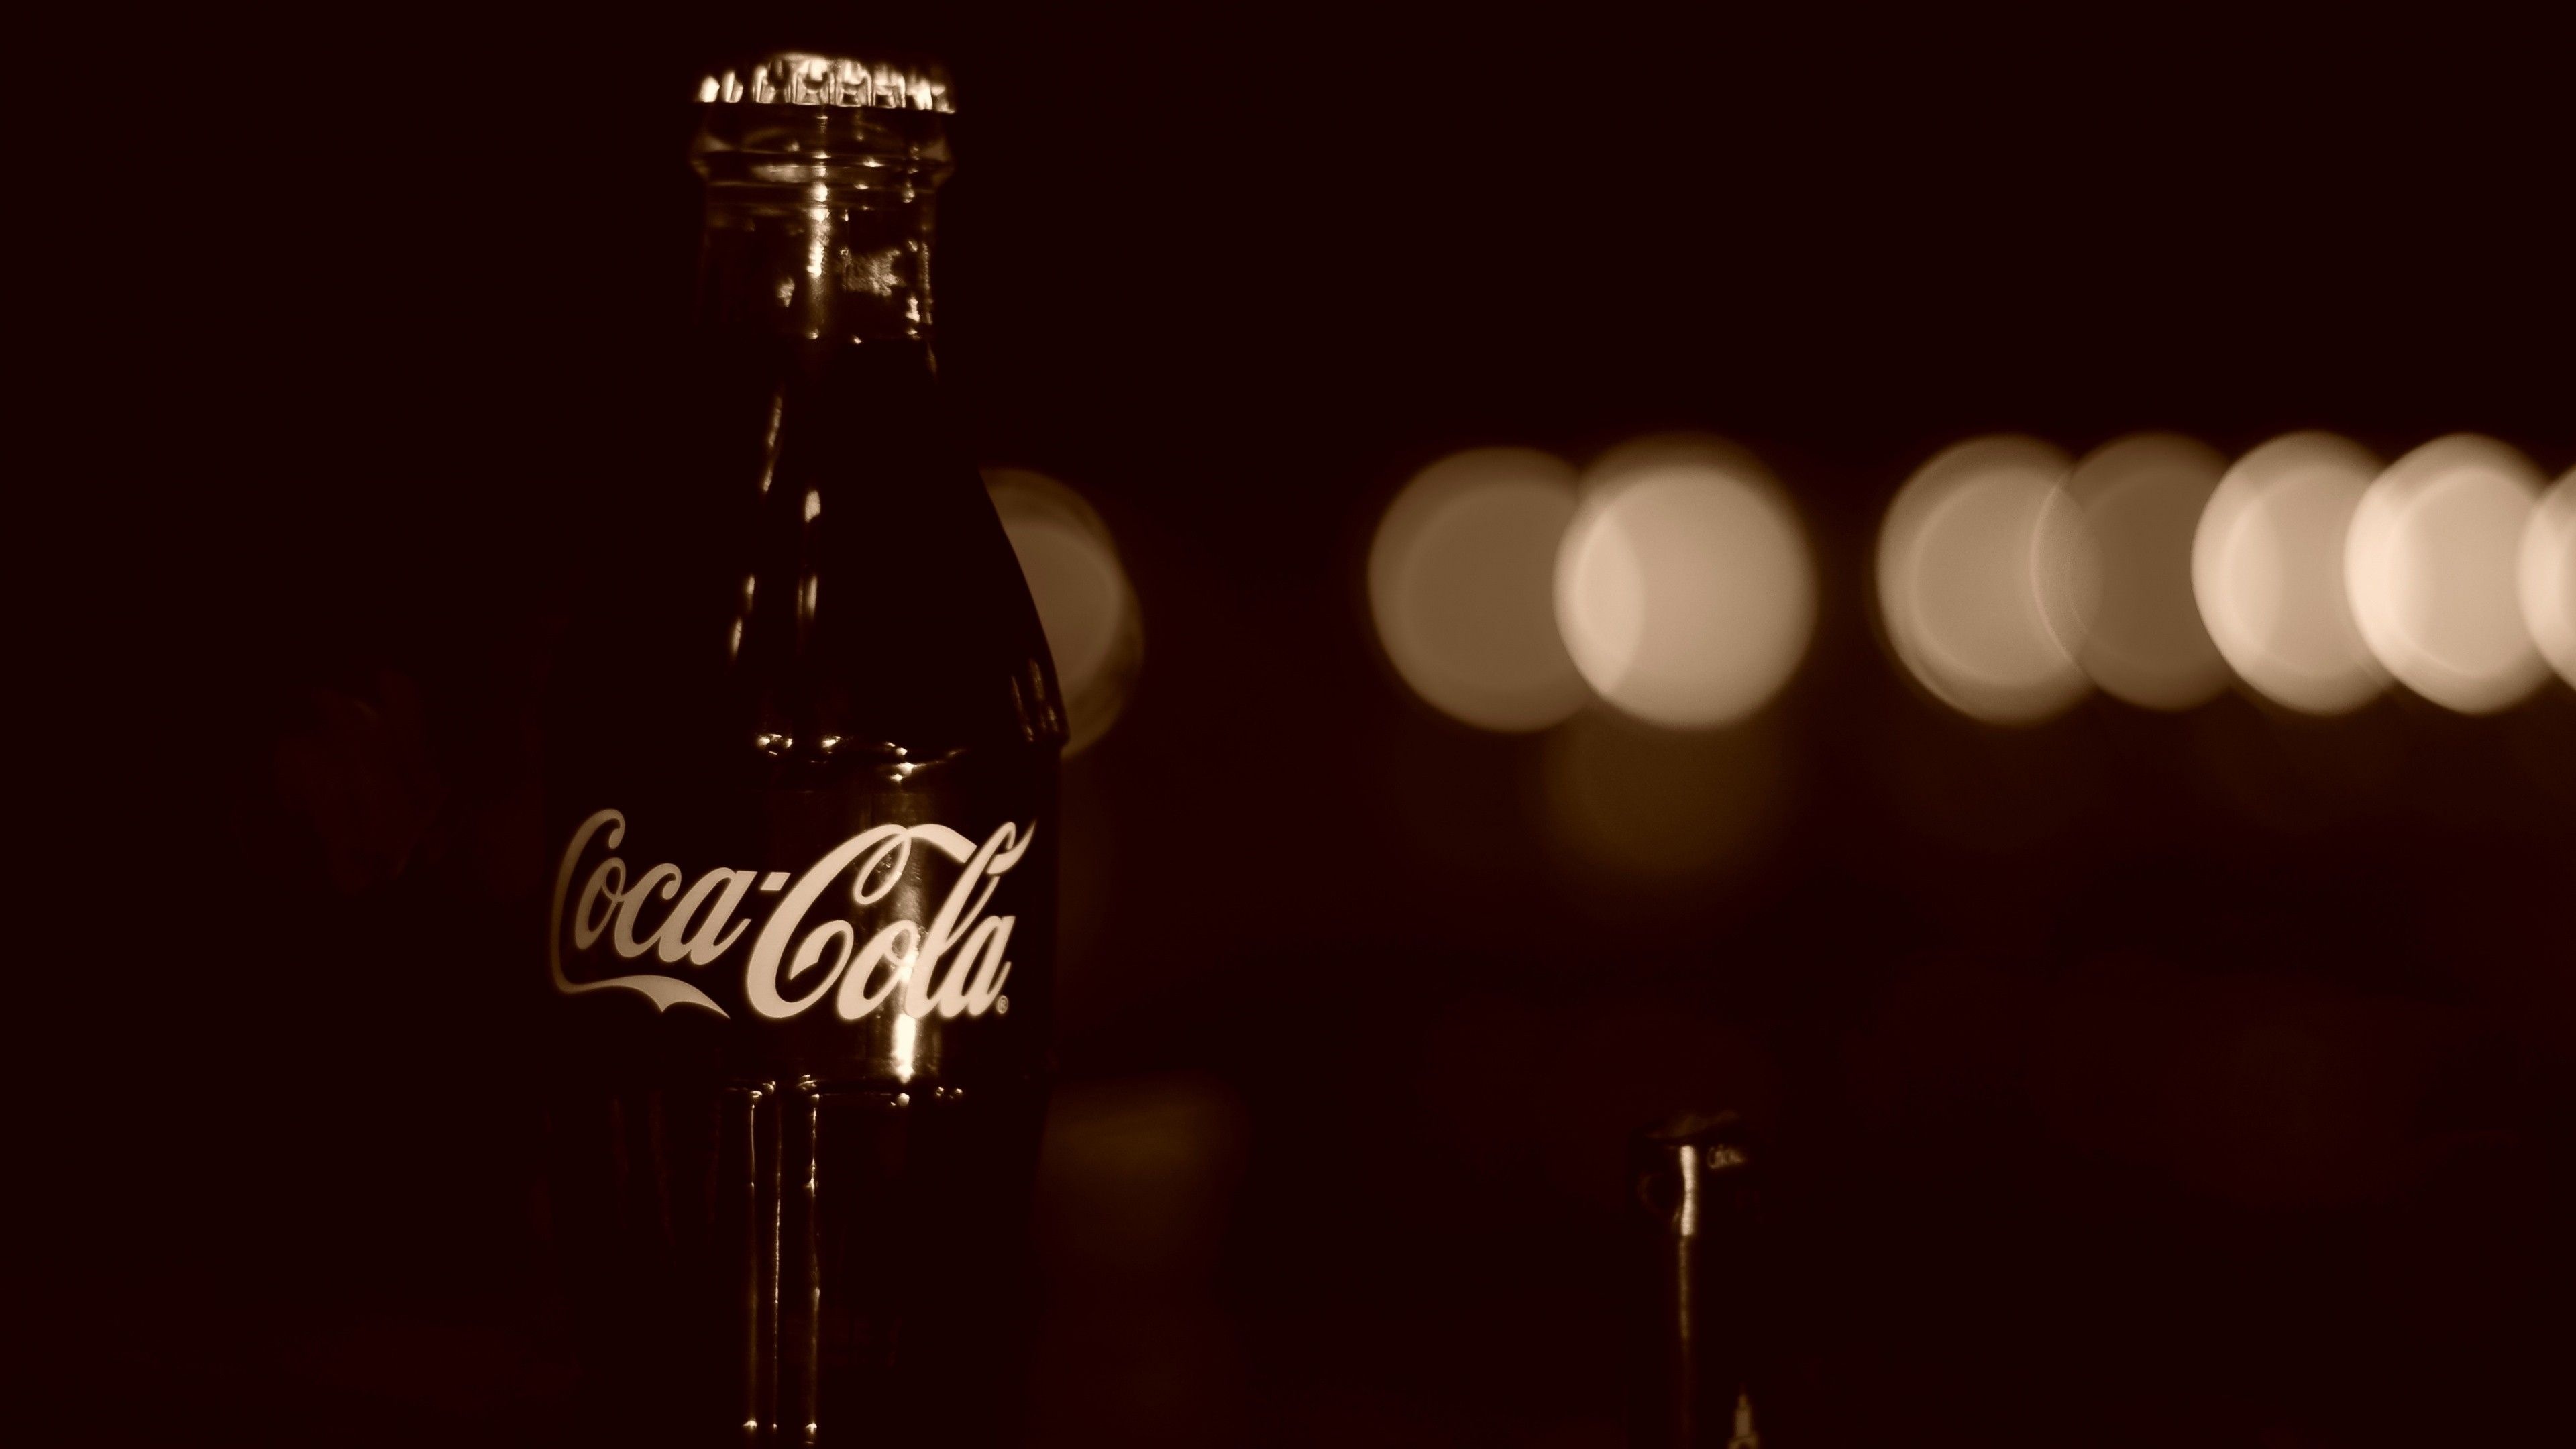 Coca-Cola: Ranked No. 87 in the 2018 Fortune 500 list of the largest United States corporations by total revenue. 3840x2160 4K Wallpaper.